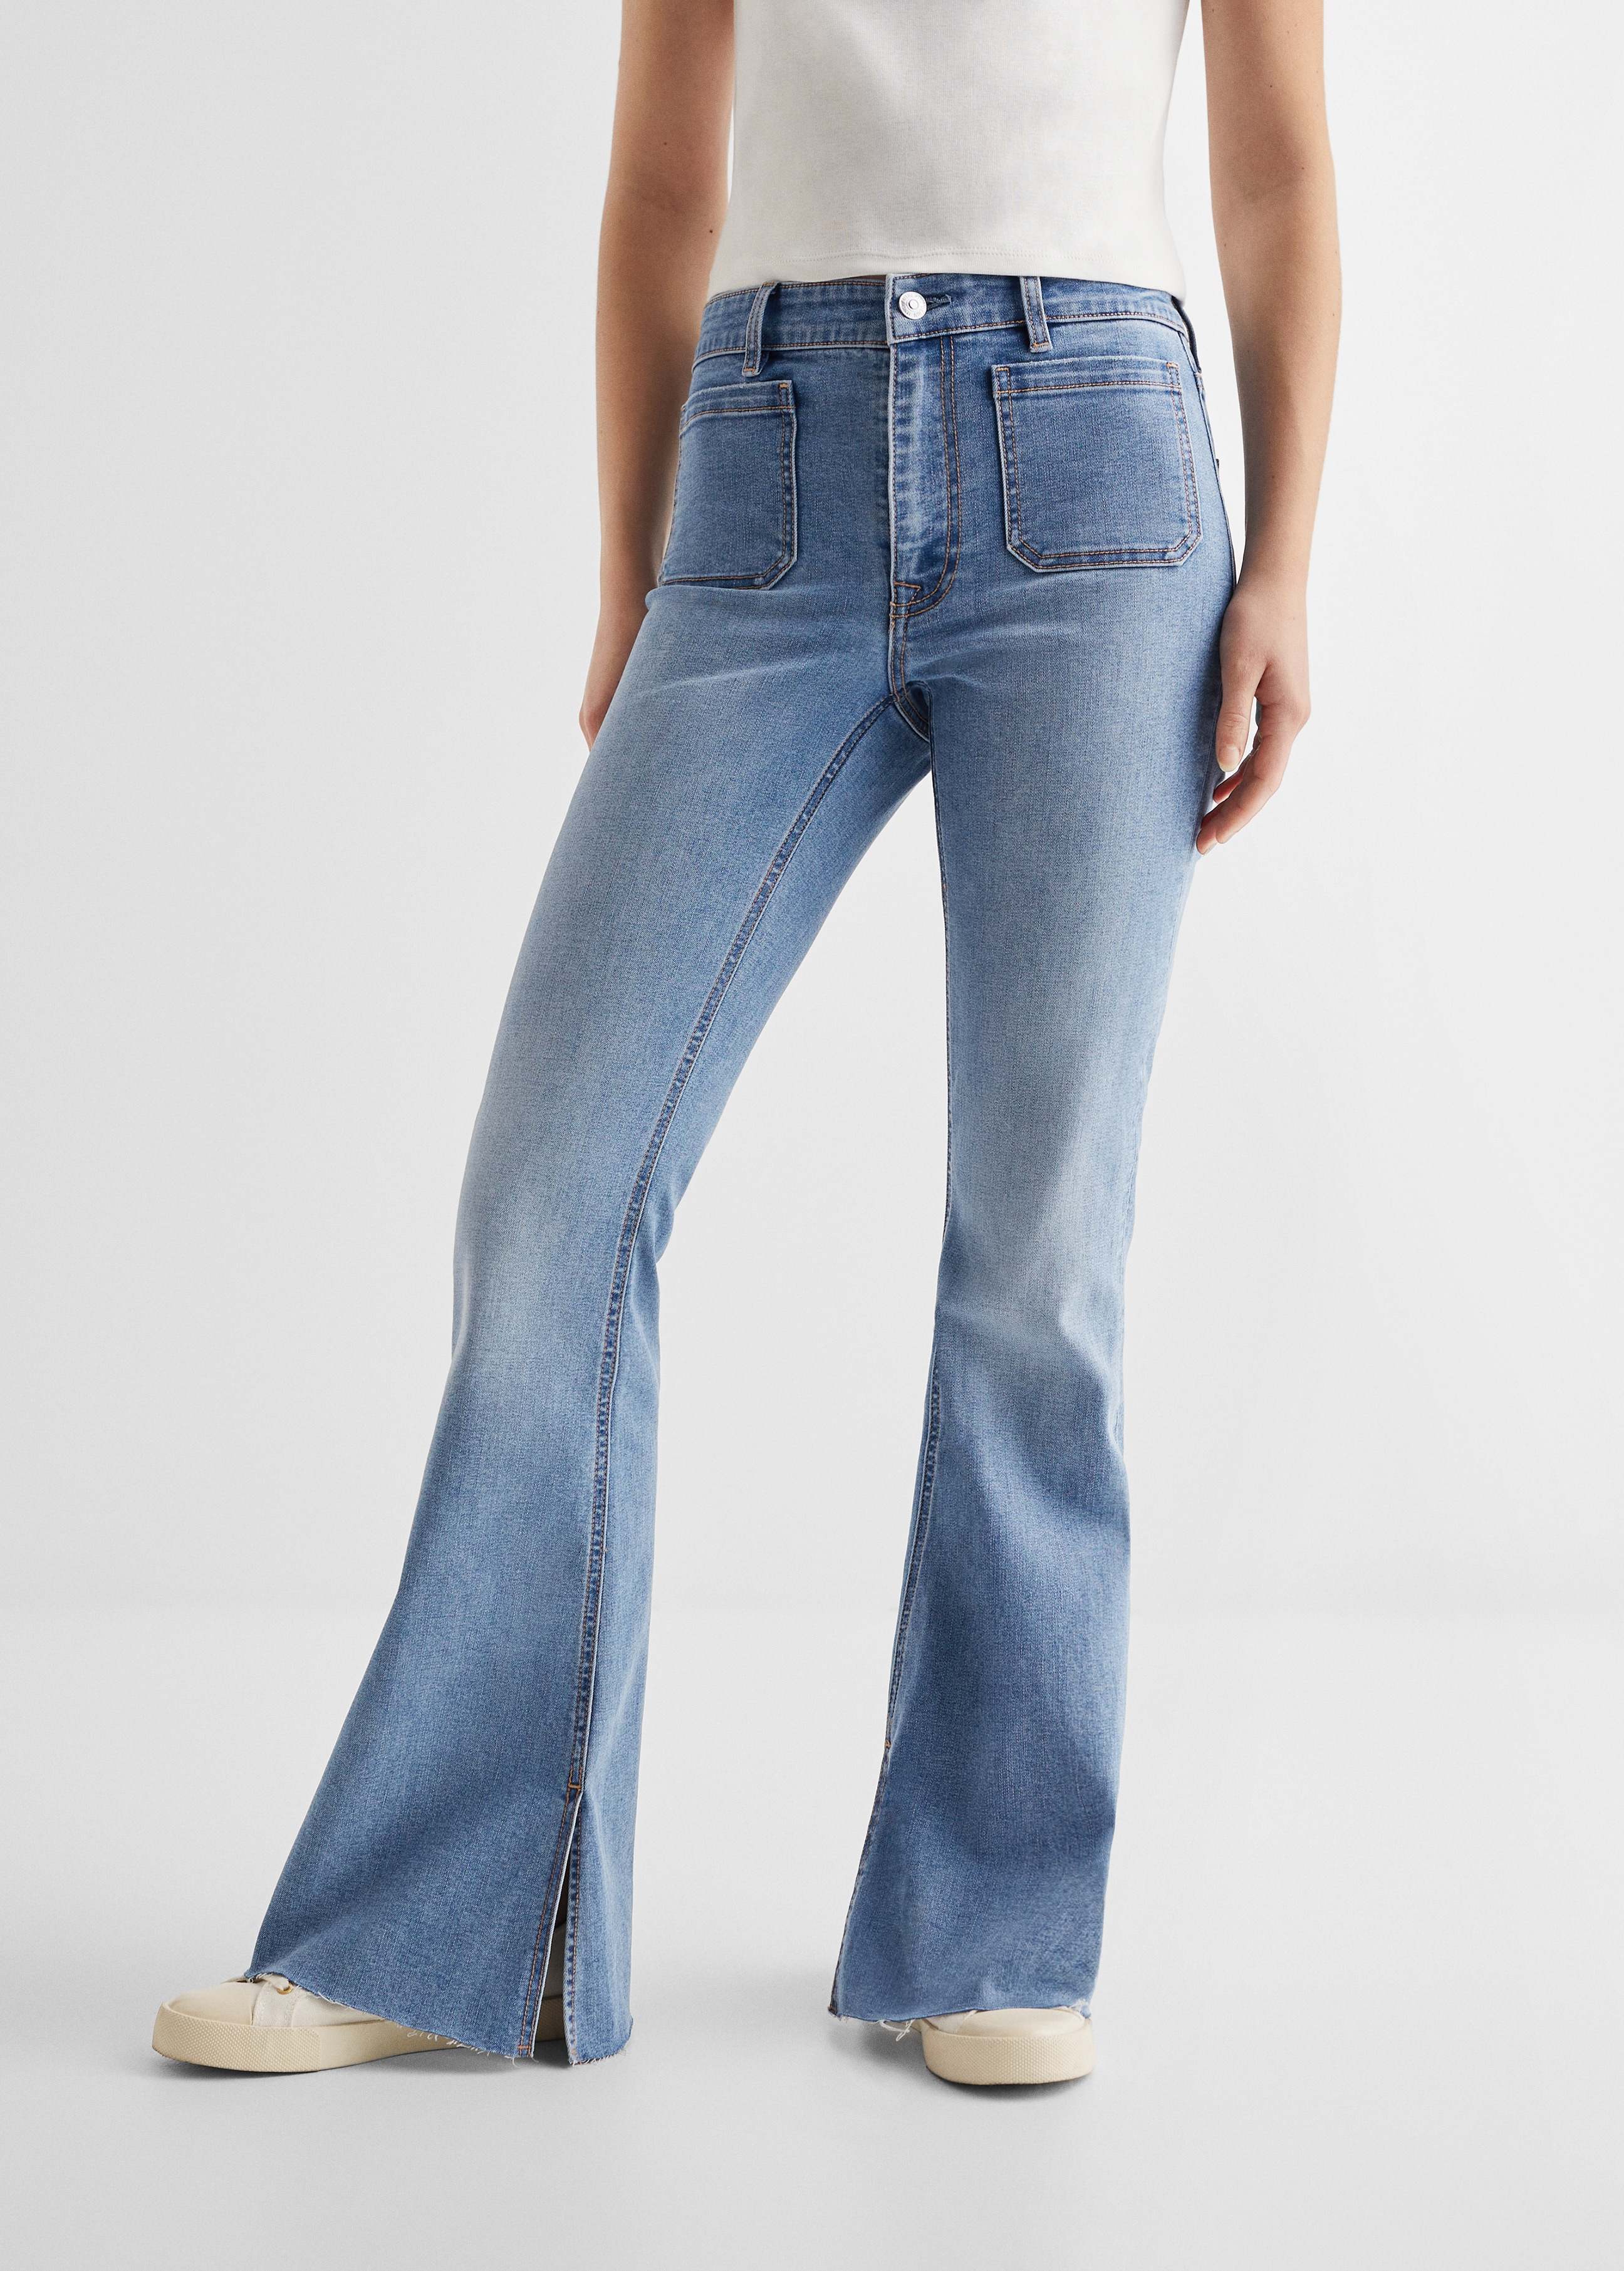 Culotte jeans with openings - Details of the article 6